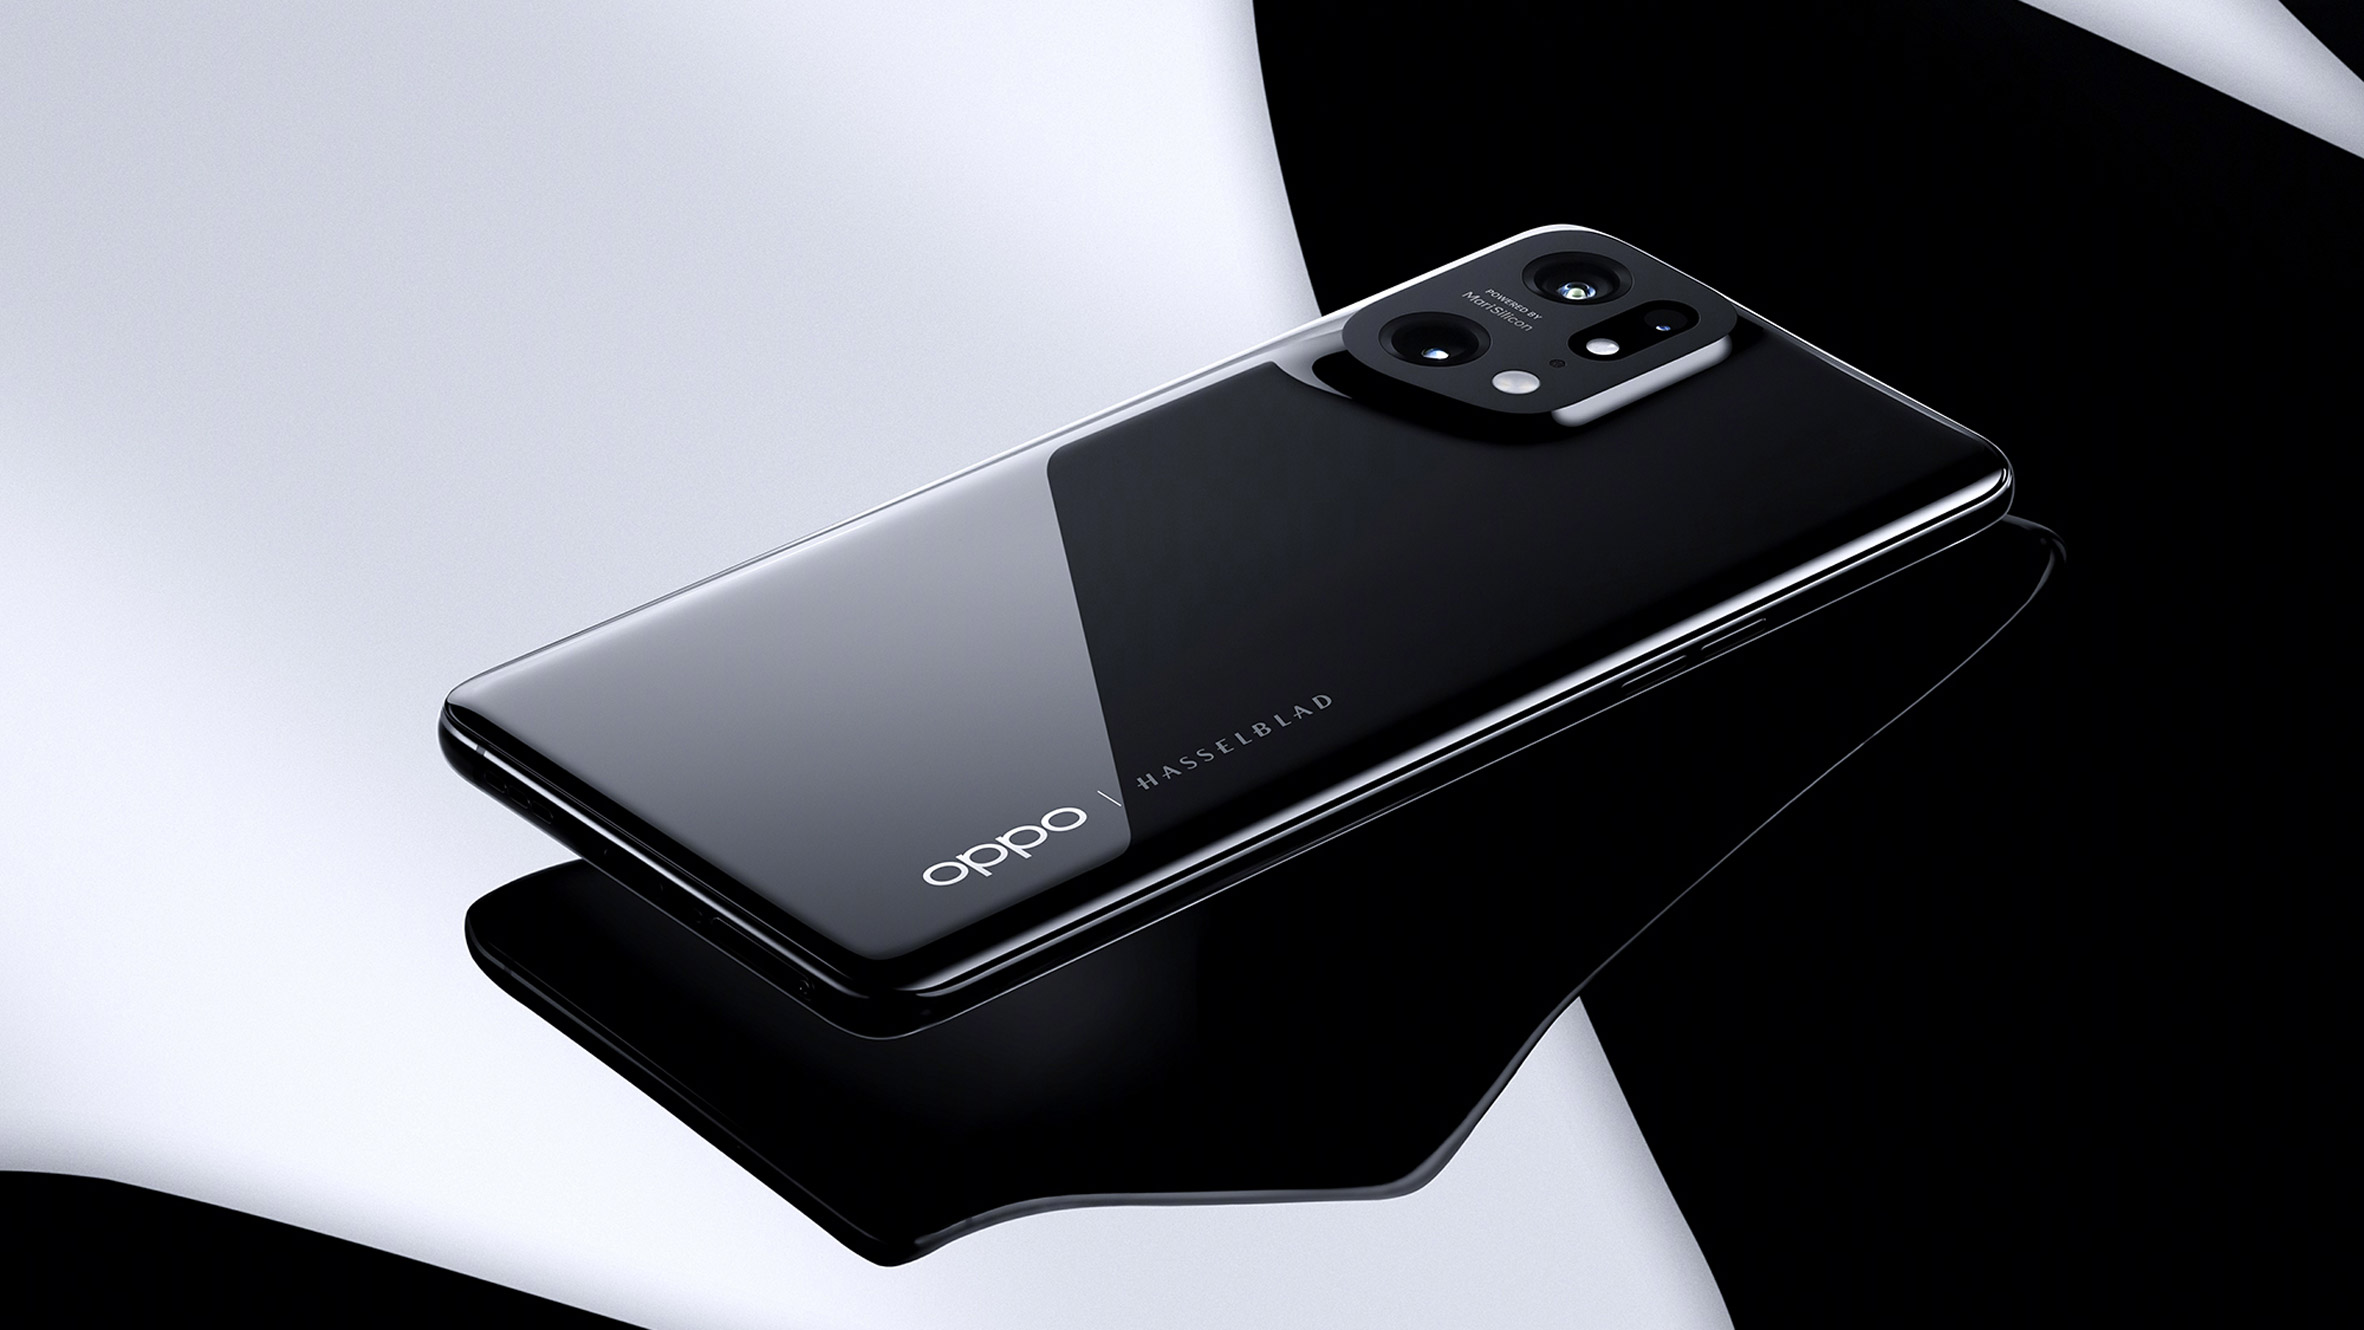 OPPO uses ceramics in its latest smartphone to allow warmth